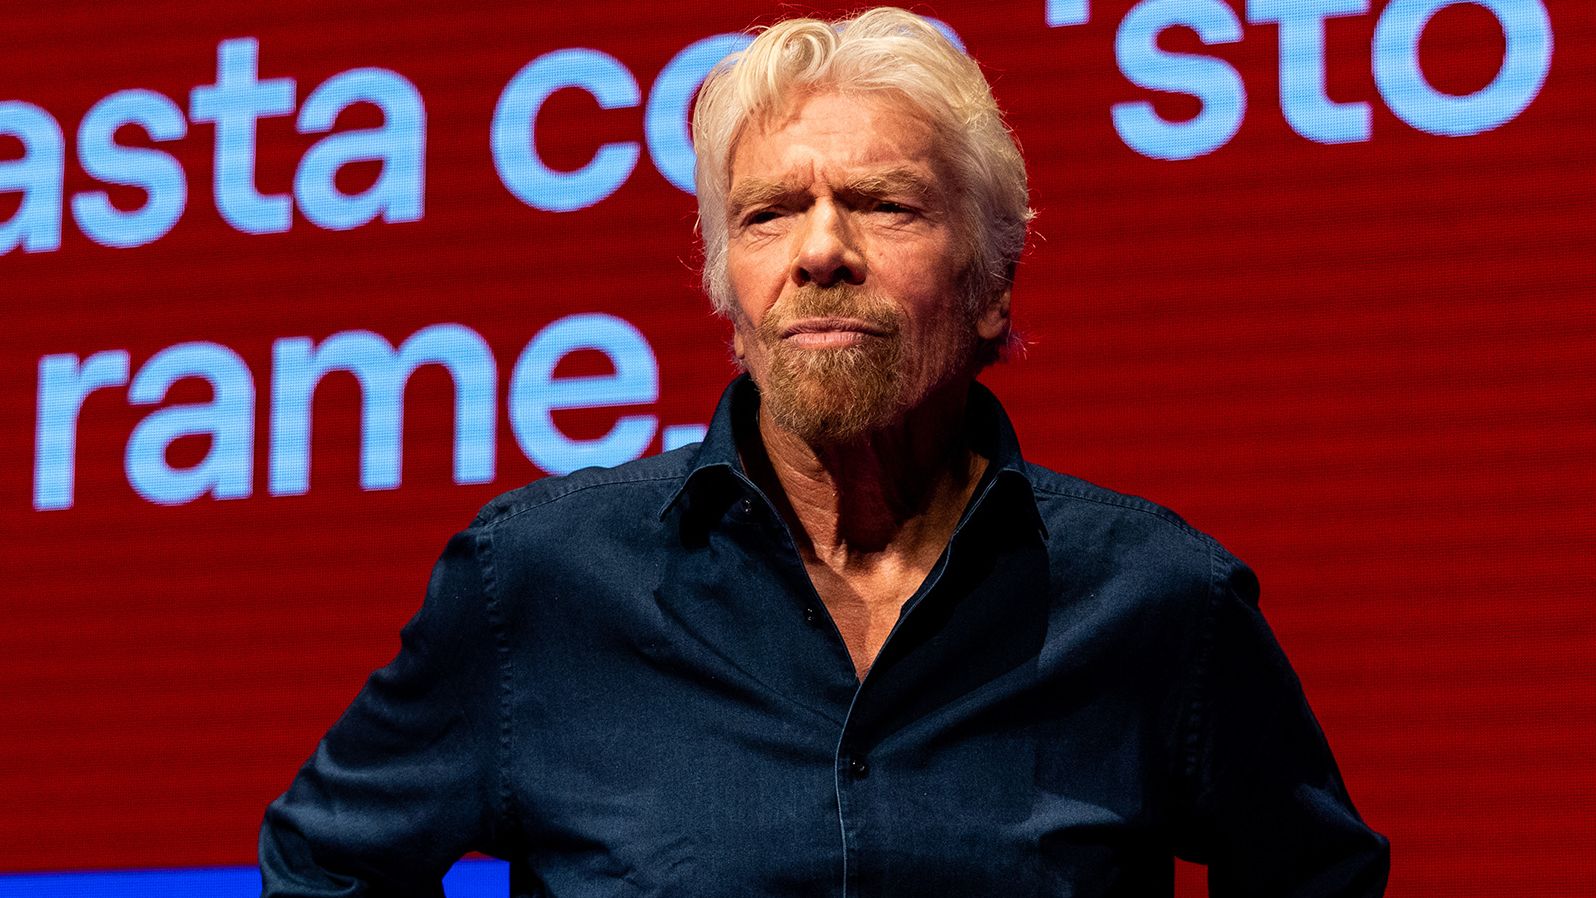 Richard Branson has been critical of Singapore's use of the death penalty.